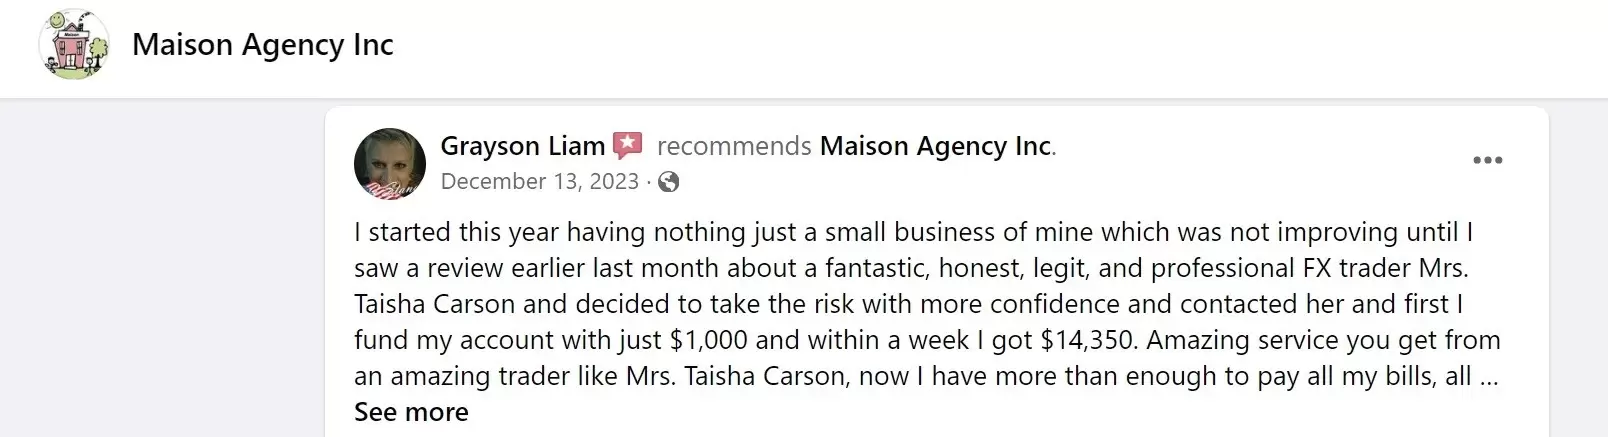 positive review of Maison Agency Inc